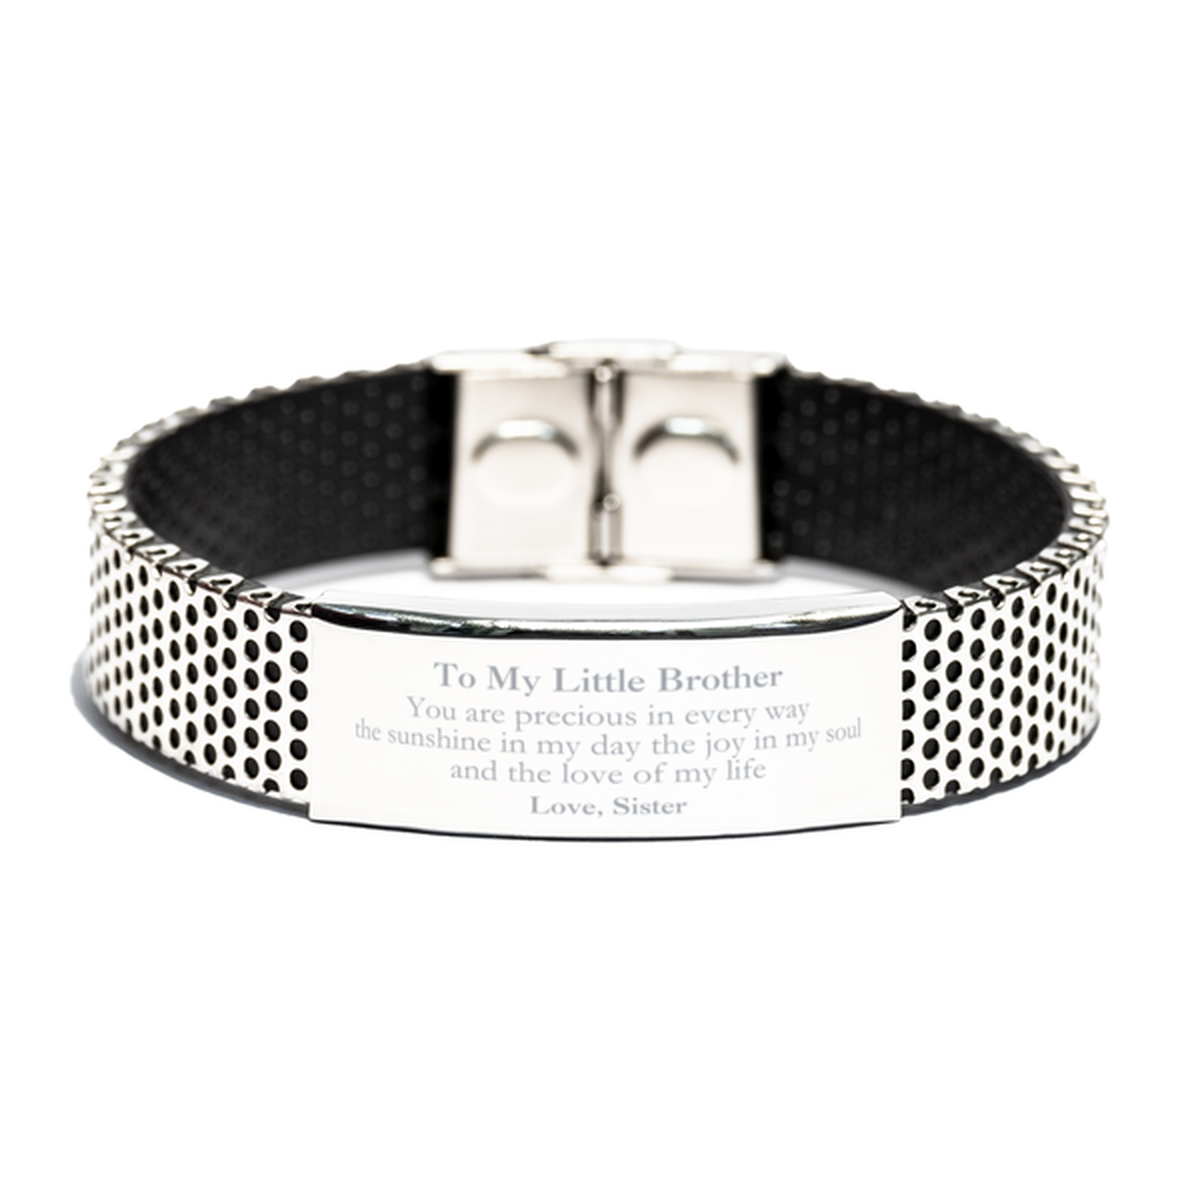 Graduation Gifts for Little Brother Stainless Steel Bracelet Present from Sister, Christmas Little Brother Birthday Gifts Little Brother You are precious in every way the sunshine in my day. Love, Sister